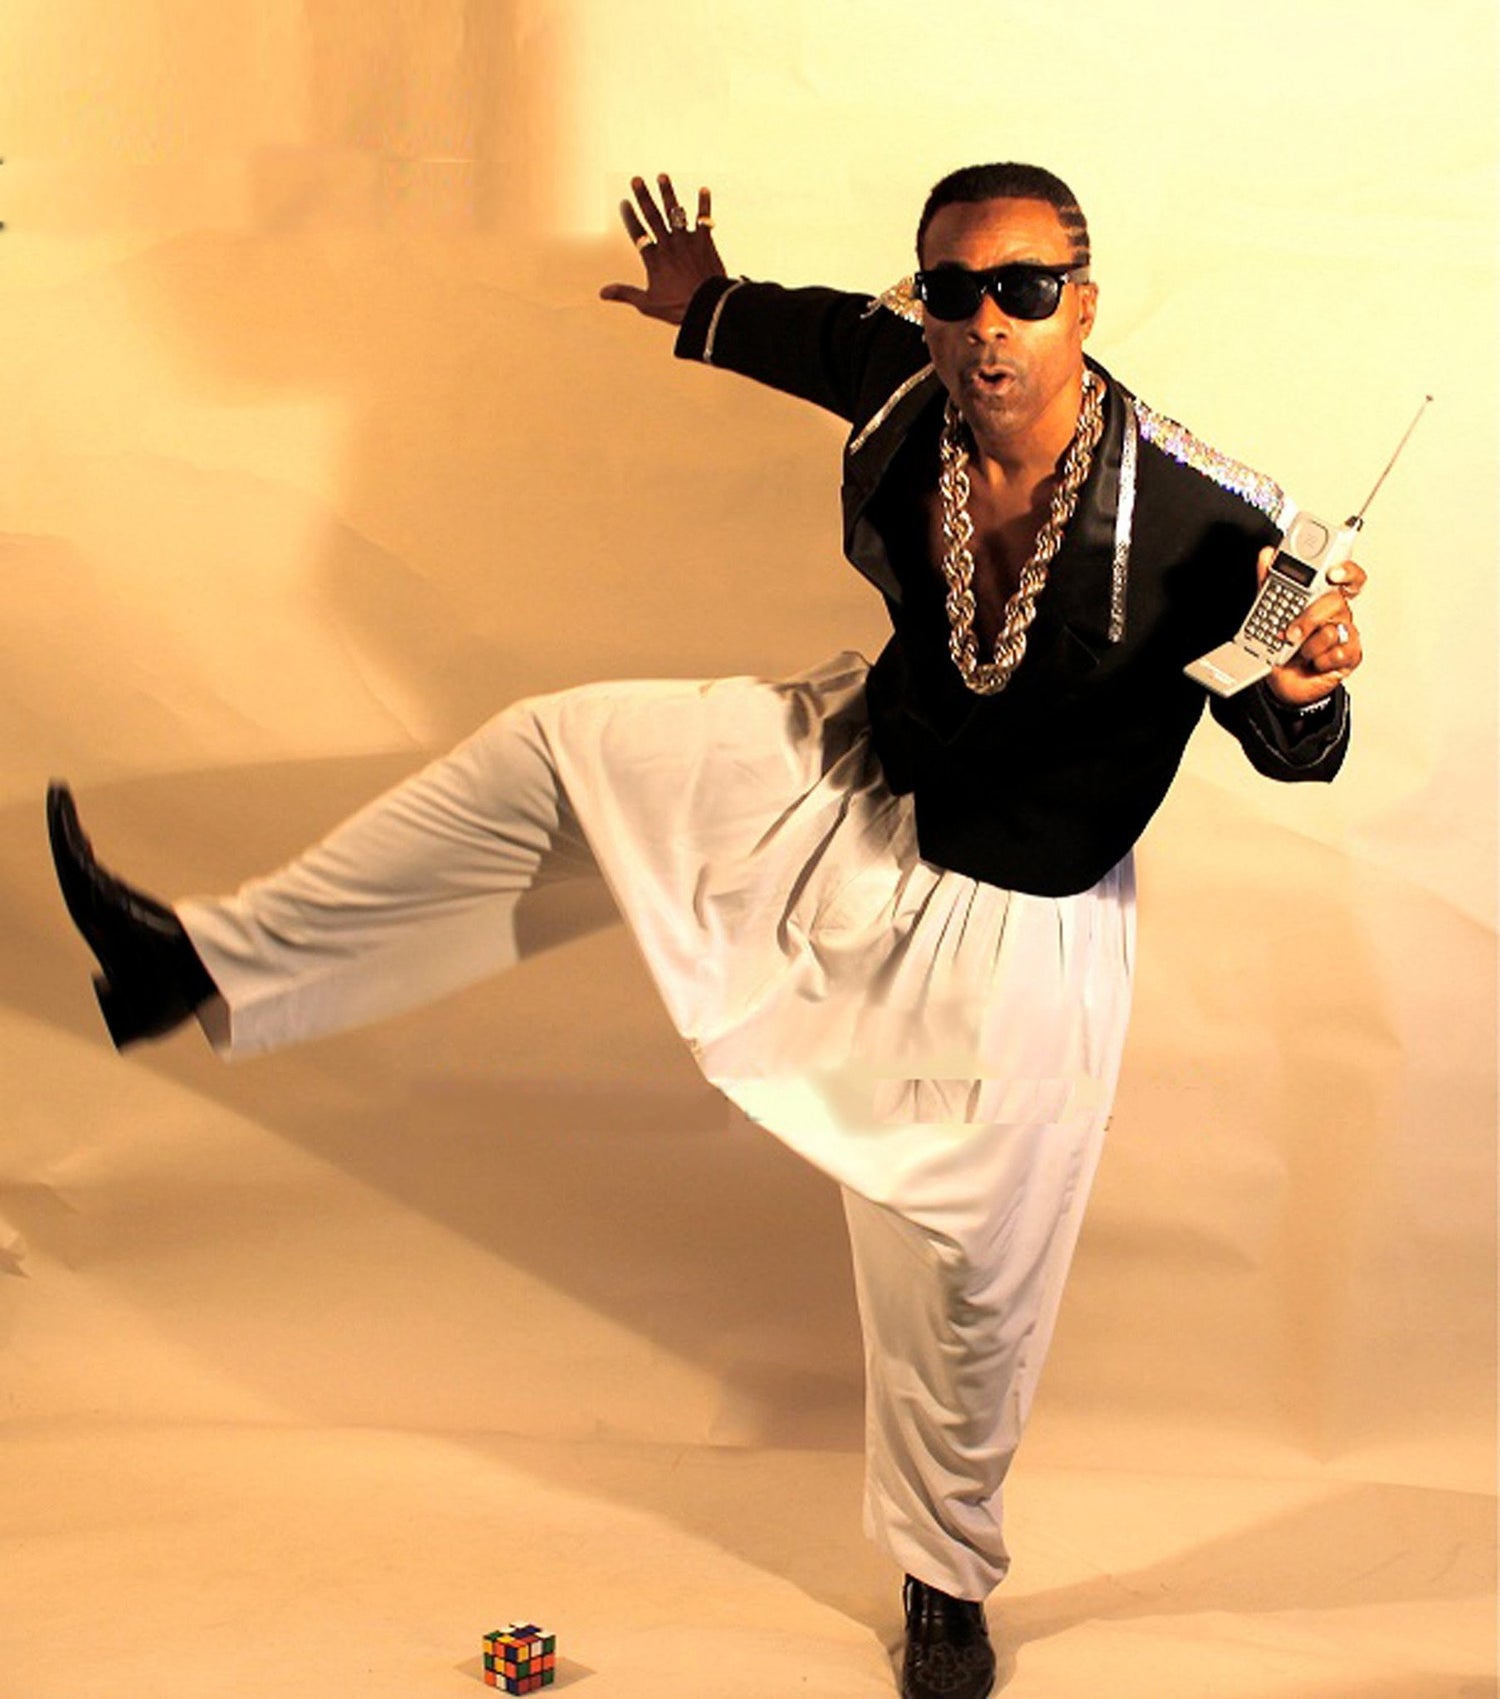 It's MC Hammer time!  Hammer Pants make a come back!